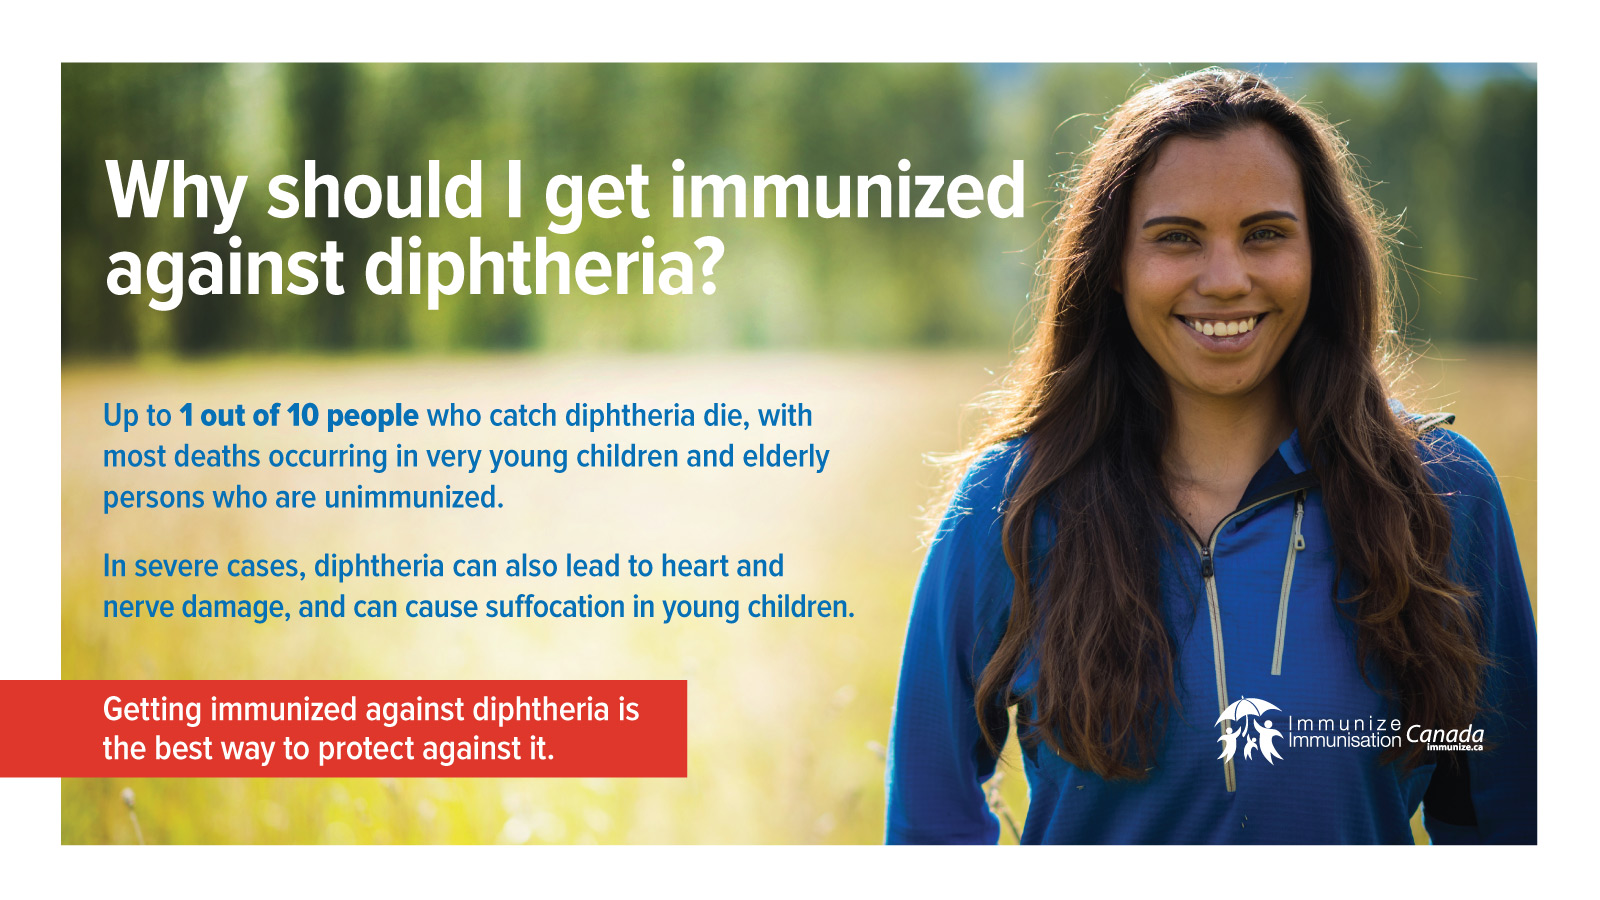 Why should I get immunized against diphtheria? - image for Twitter and Facebook